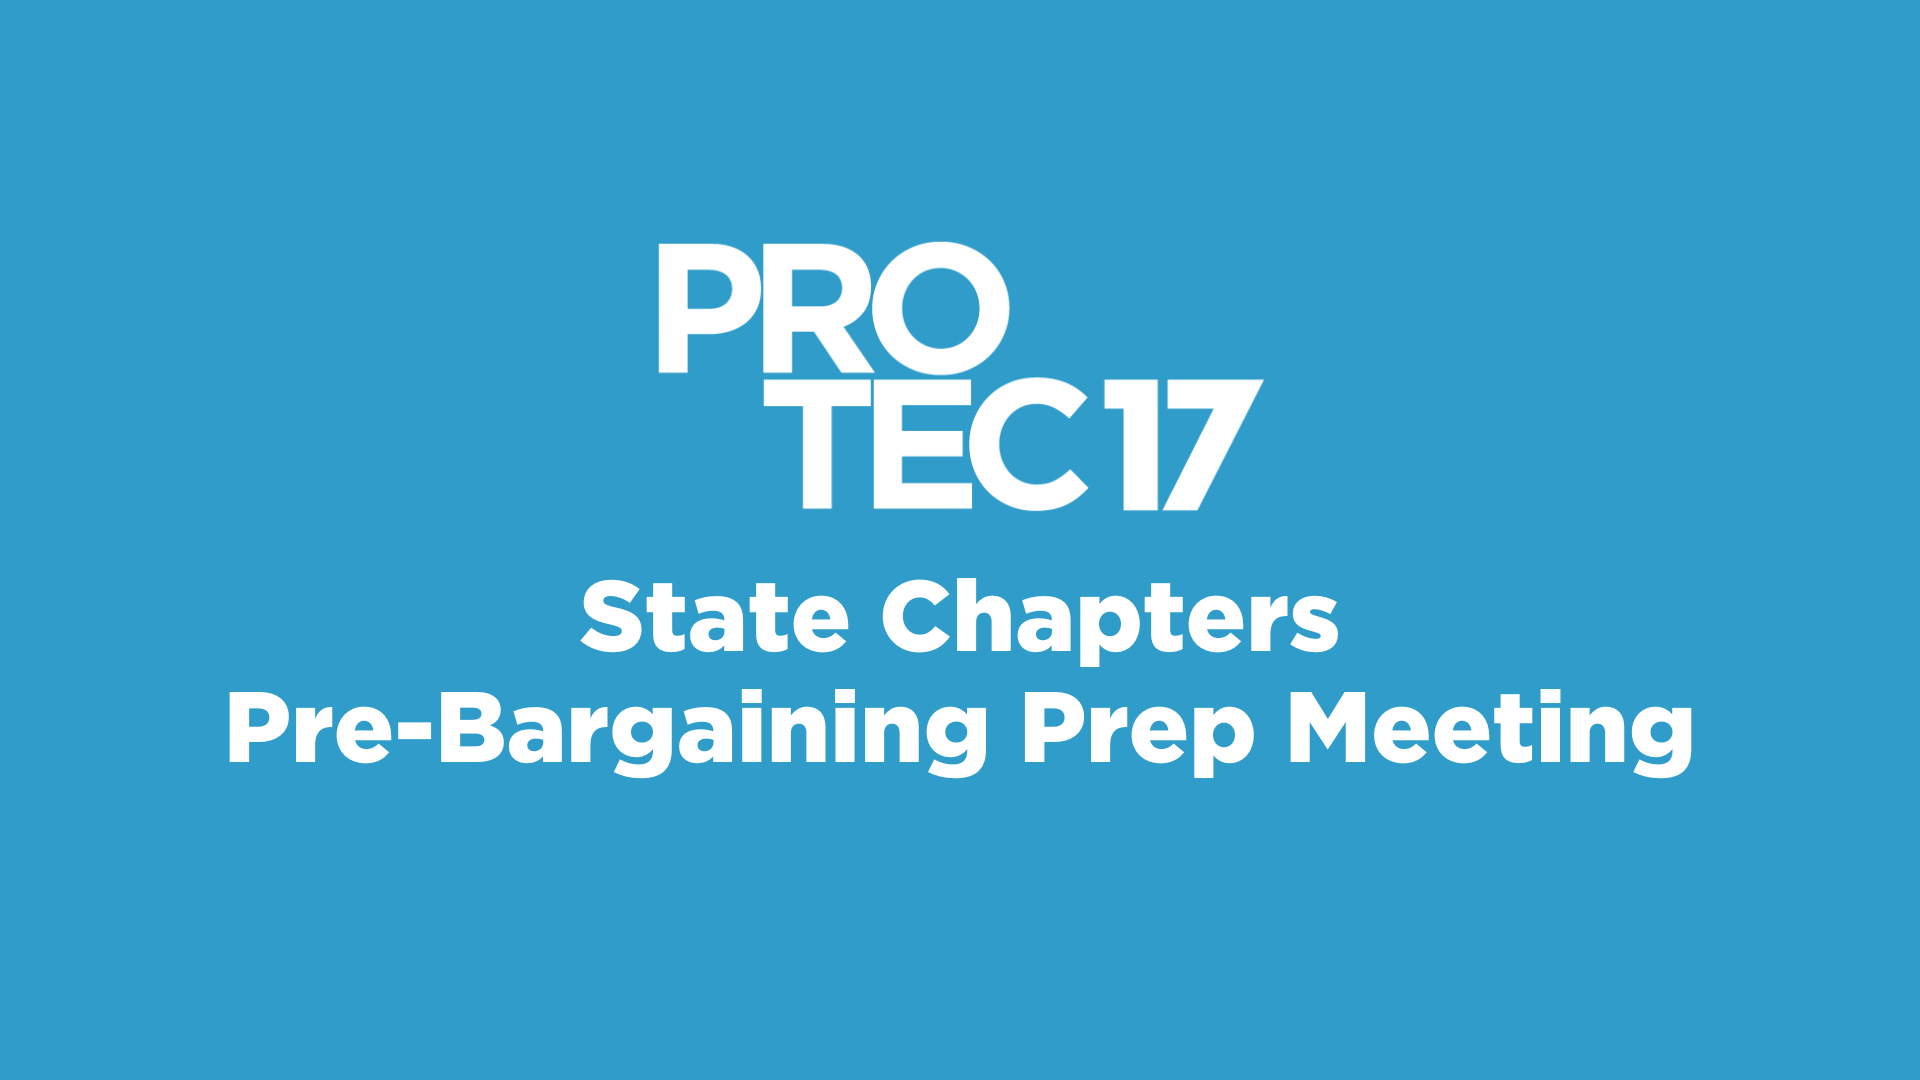 On a bright blue background, the text reads, "State Chapters Pre-Bargaining Prep Meeting." The PROTEC17 logo is at the top.